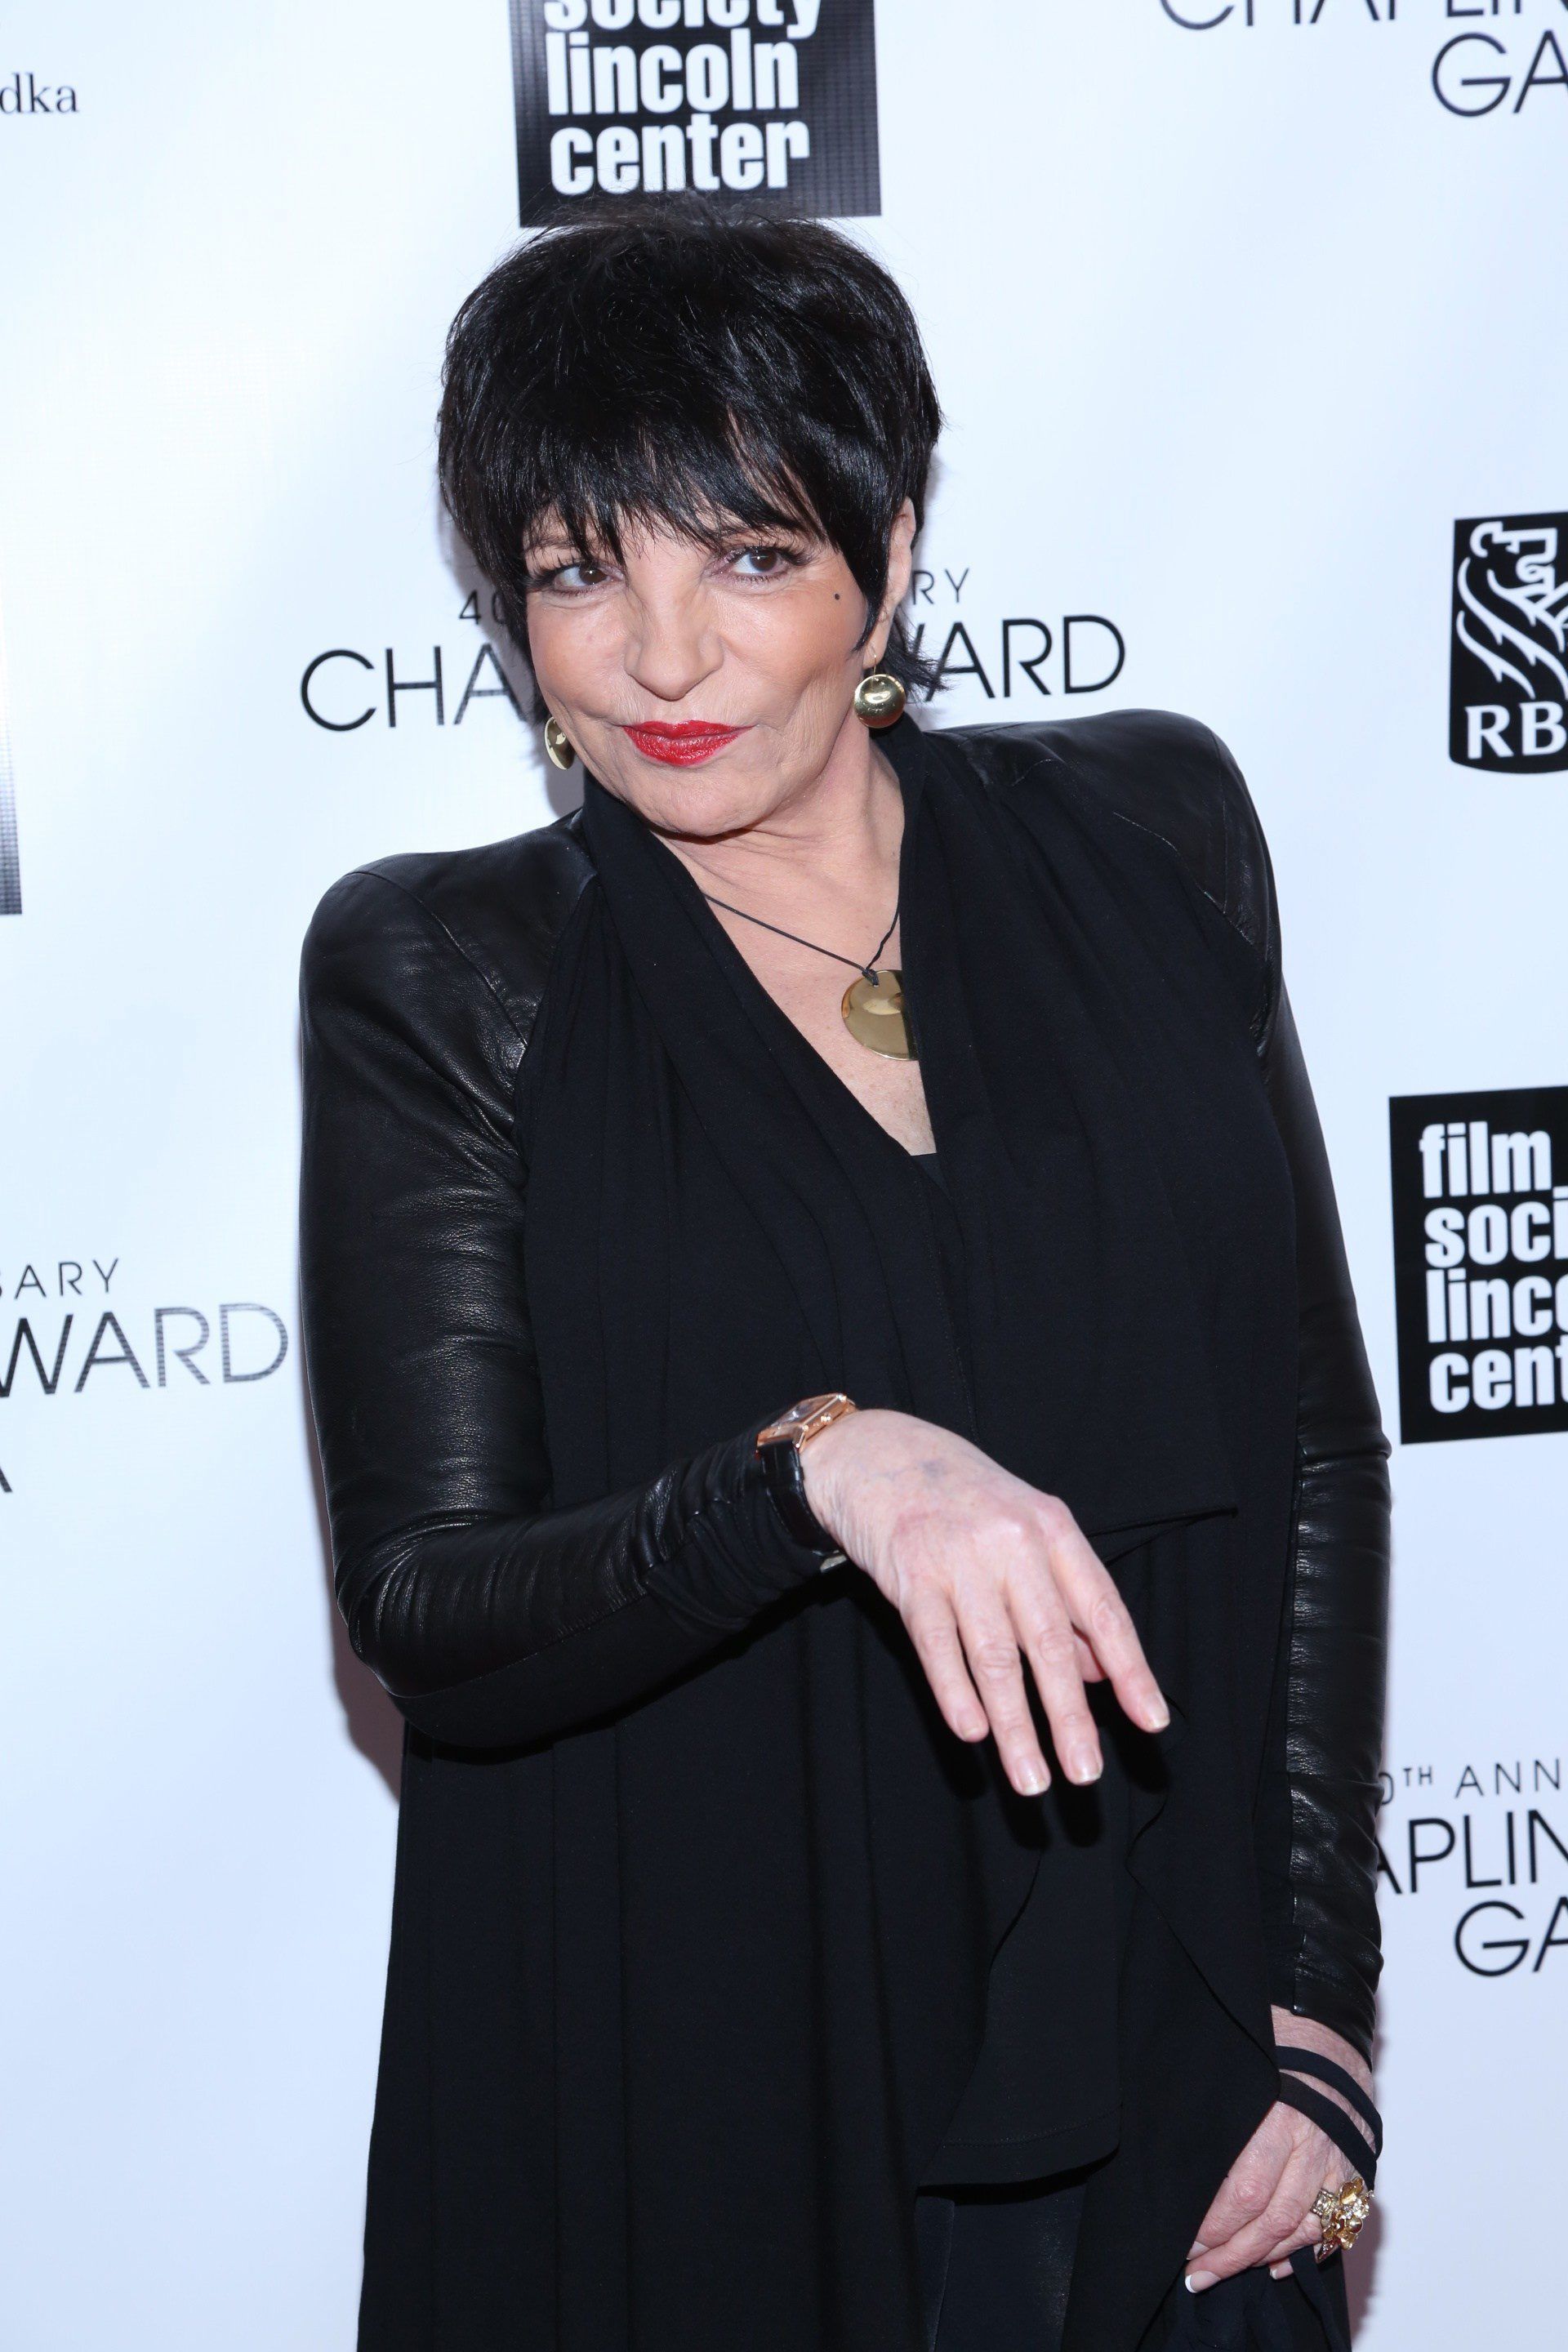 Liza Minnelli Enters Rehab For Substance Abuse, Again - Fame10